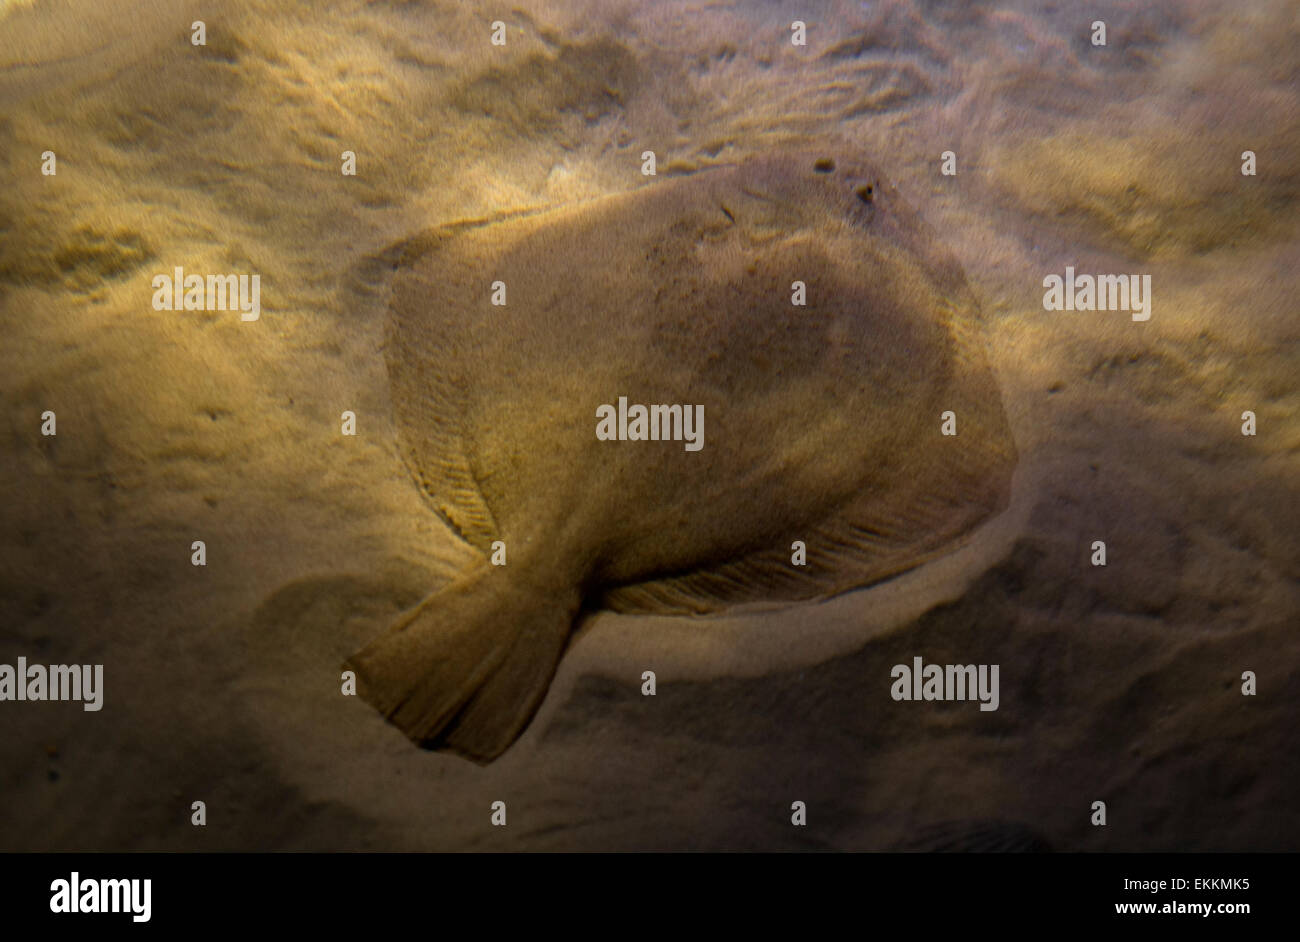 The turbot lives in coastal waters up to depths of about 80 m on sandy or rocky bottoms. Stock Photo